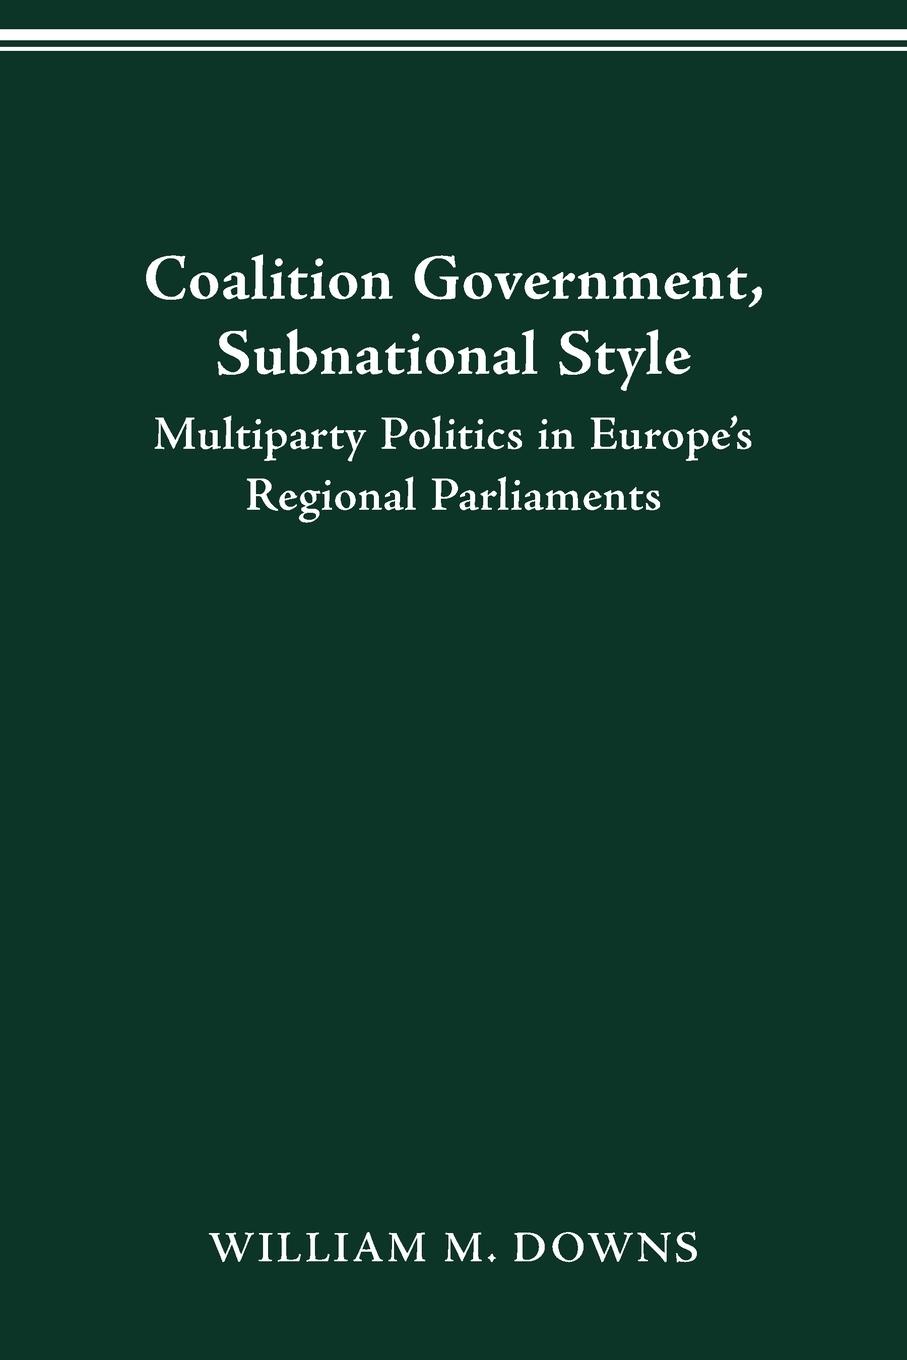 COALITION GOVERNMENT, SUBNATIONAL STYLE - Downs, William M.